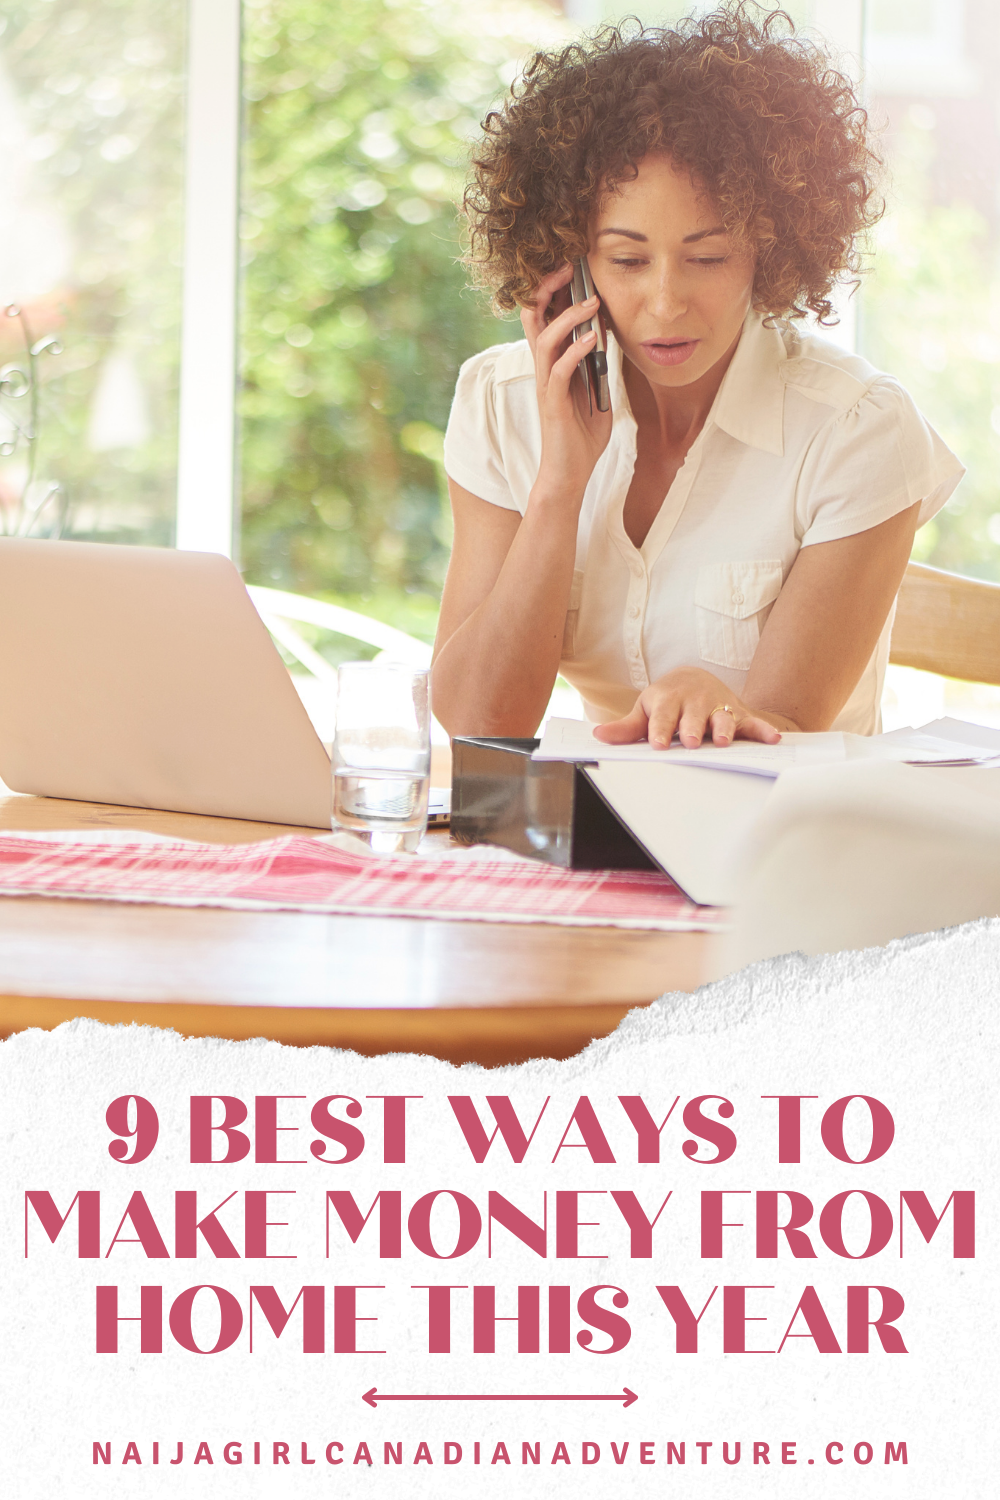 9 Best Ways to Make Money from Home This Year